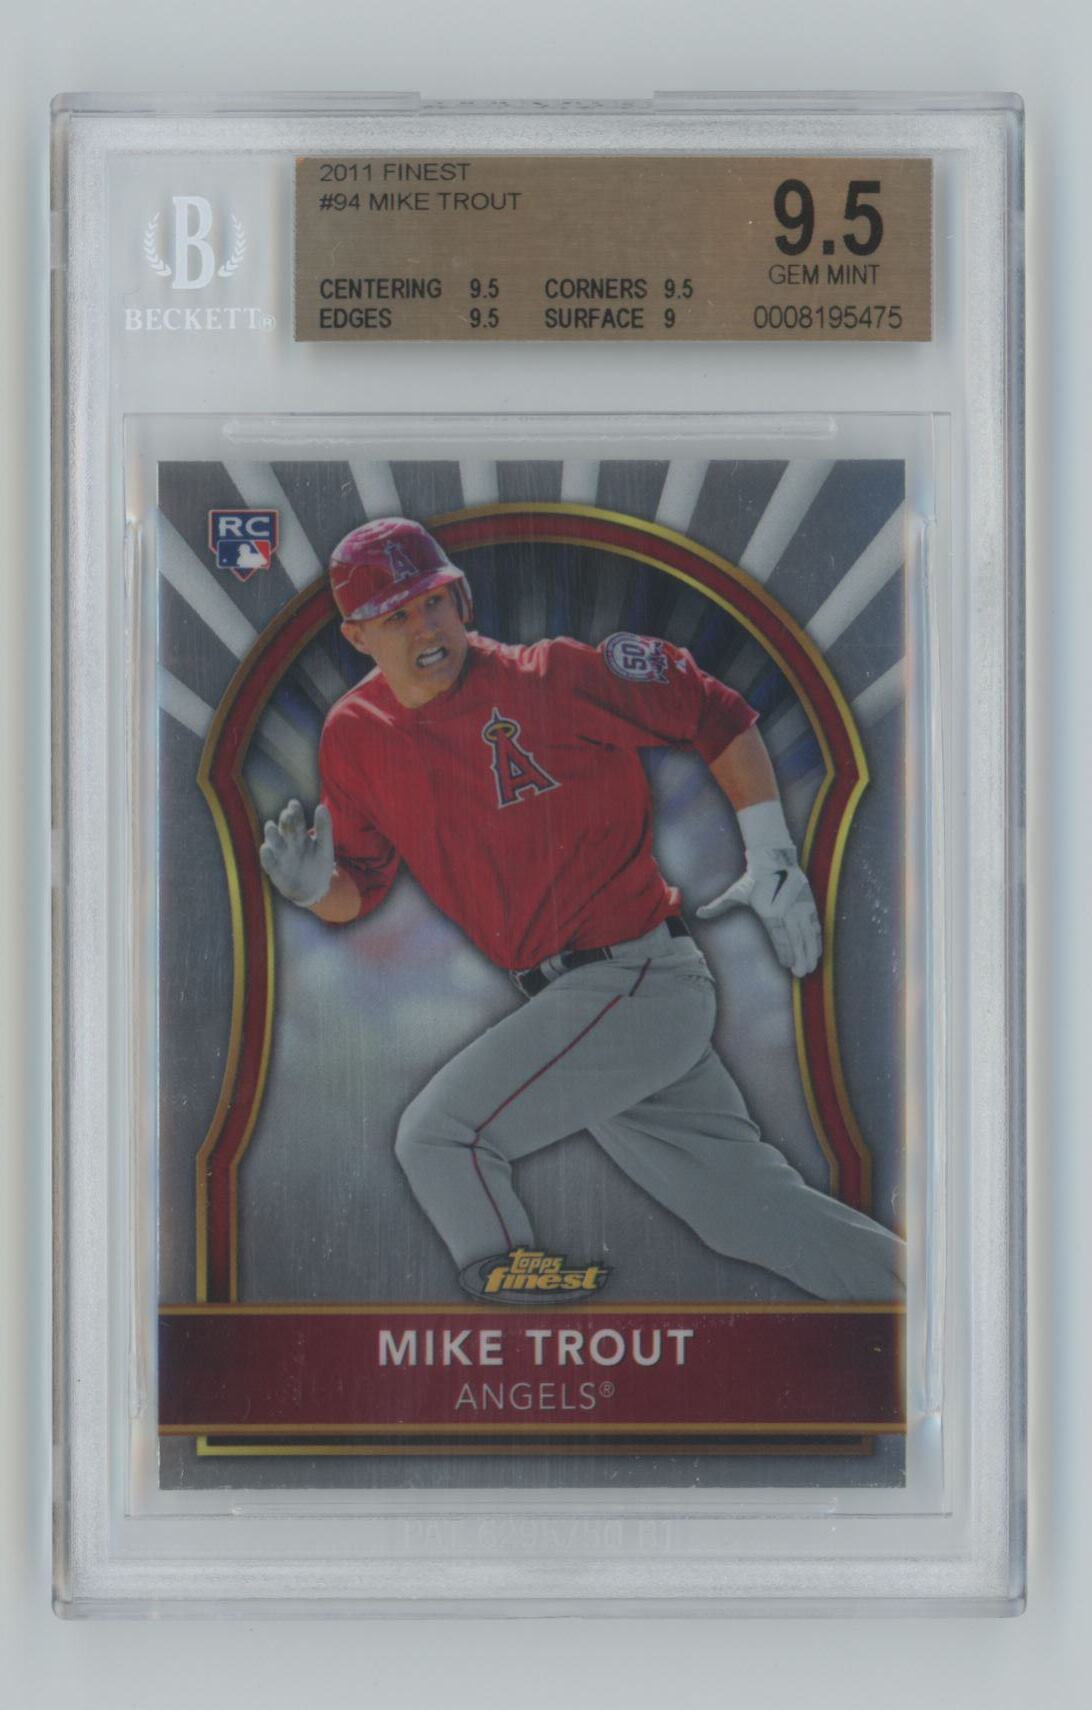 Mike Trout 2011 Topps Finest Baseball Rookie Card RC #94